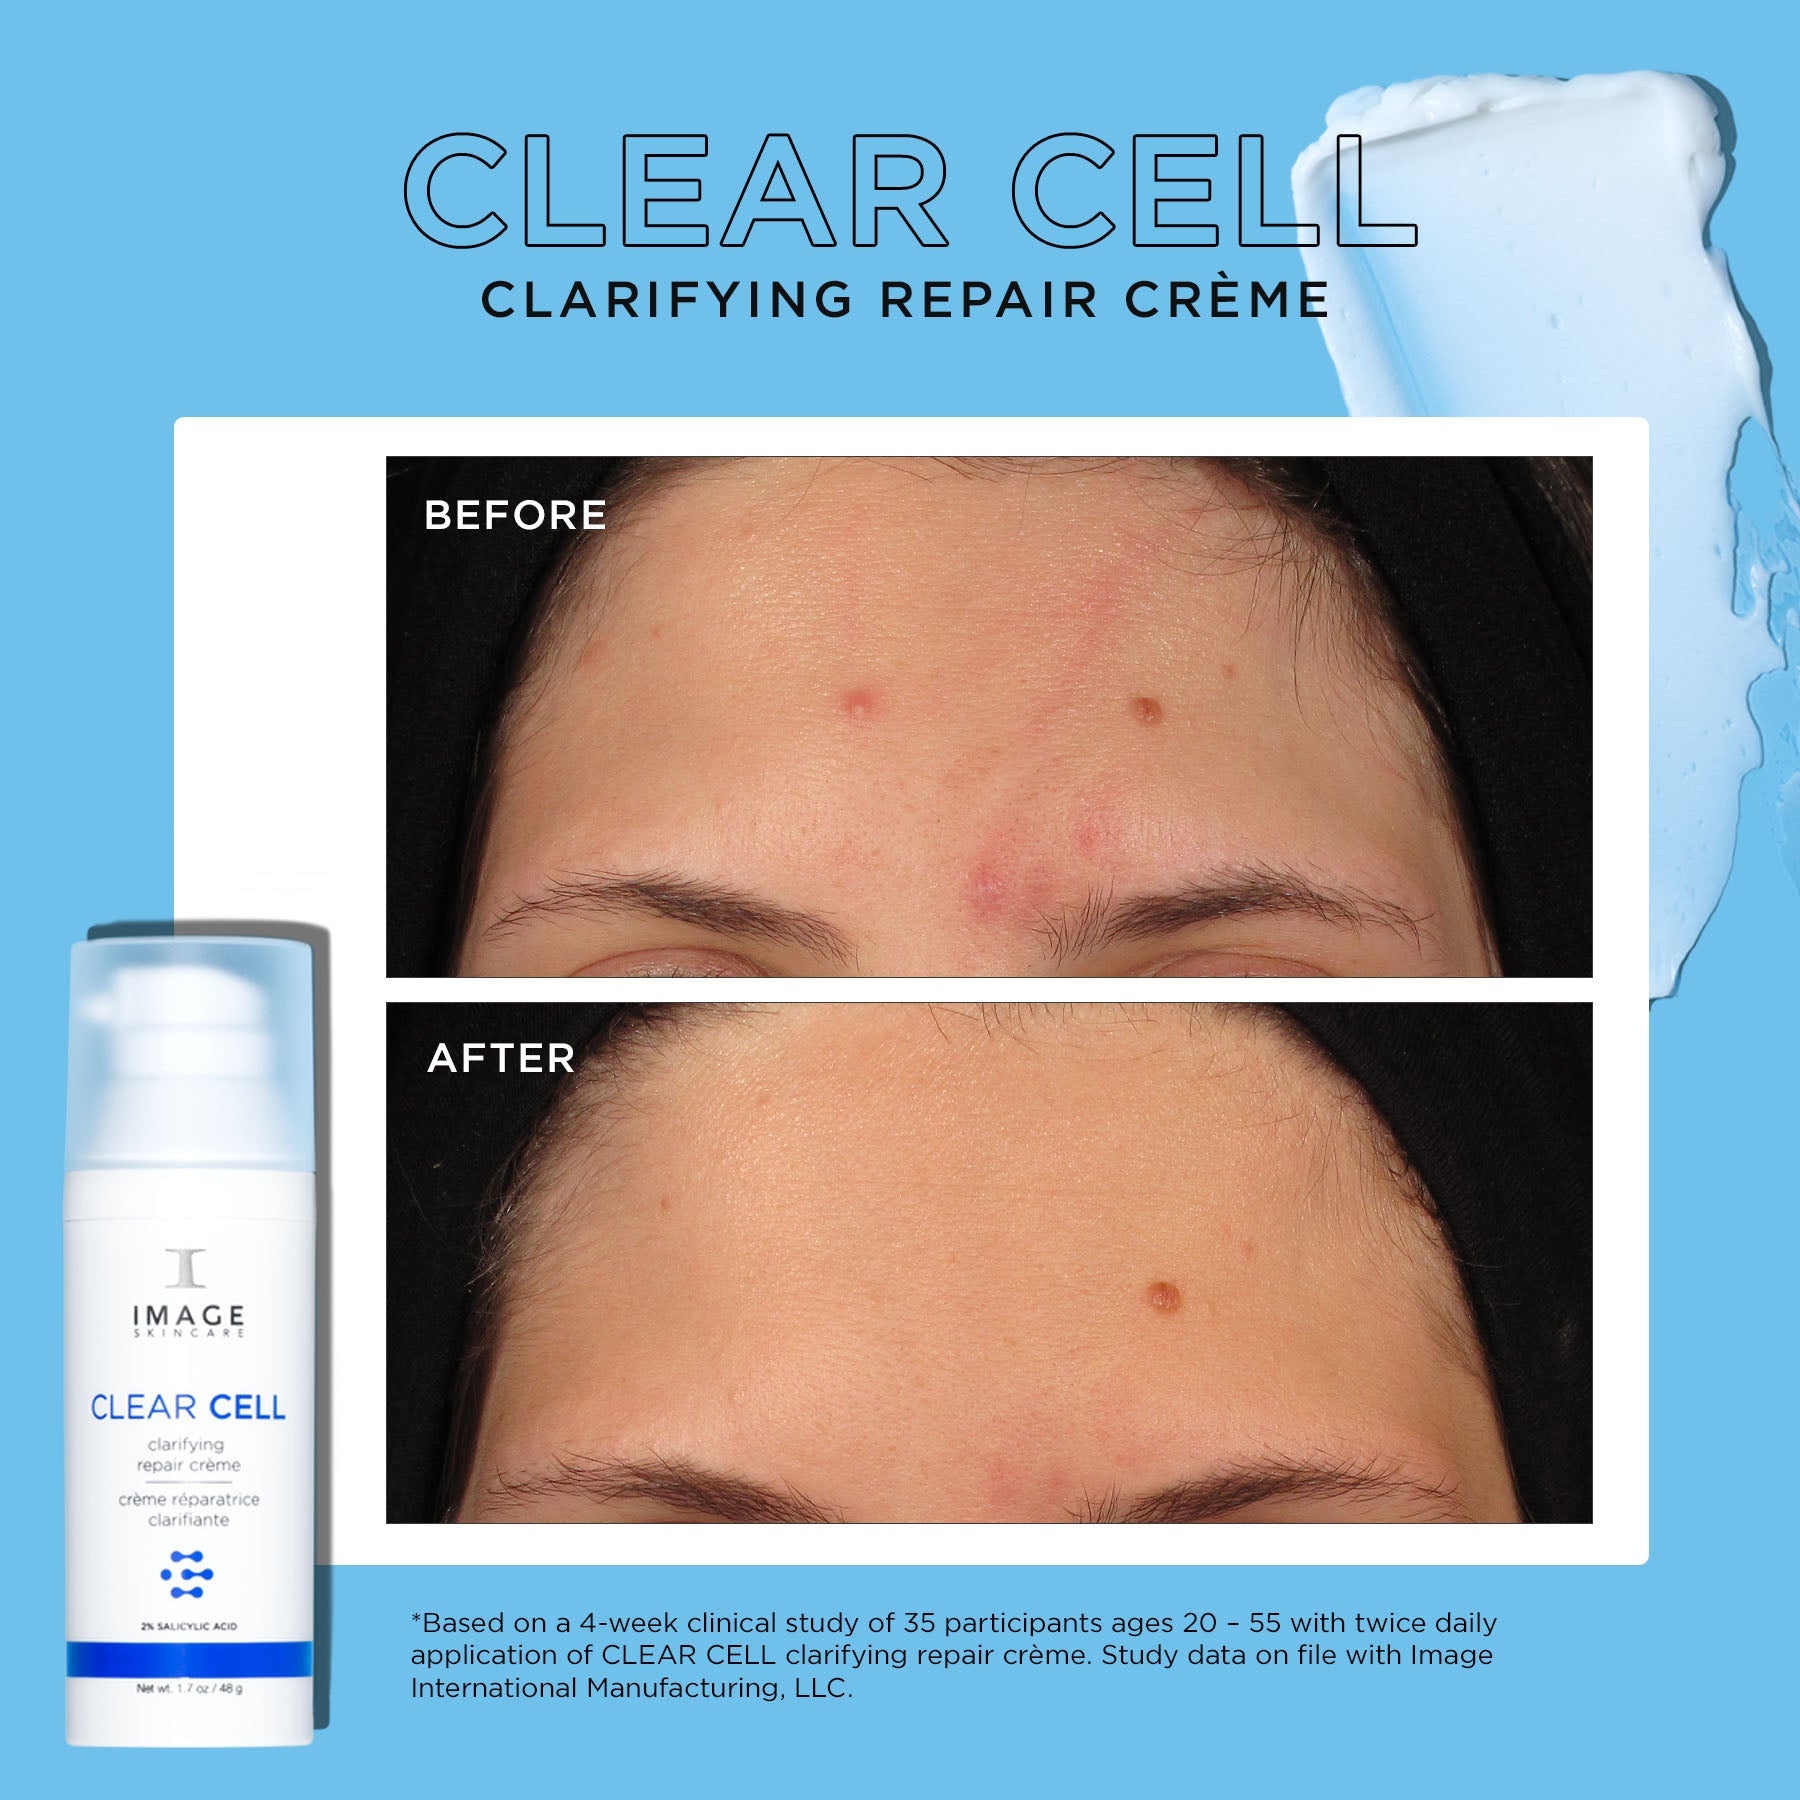 CLEAR CELL clarifying repair crème discovery-size